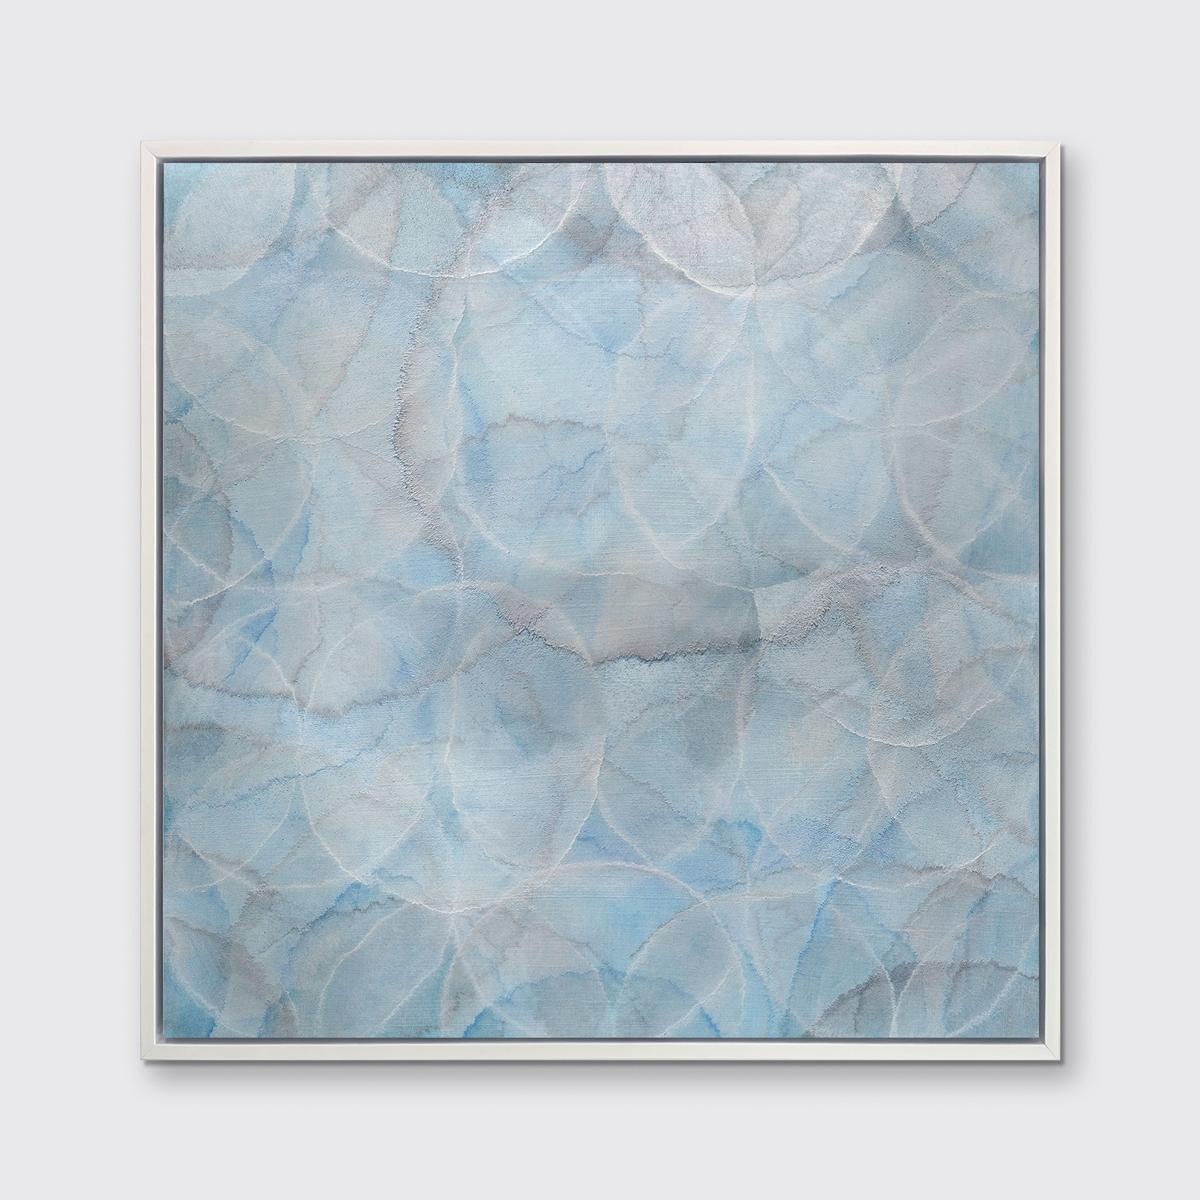 This abstract limited edition print by Roger Mudre features a cool blue, grey, and silver palette. The artist layers light outlines of circles over one another, which have an almost glowing aesthetic, which reaches out to all edges of the